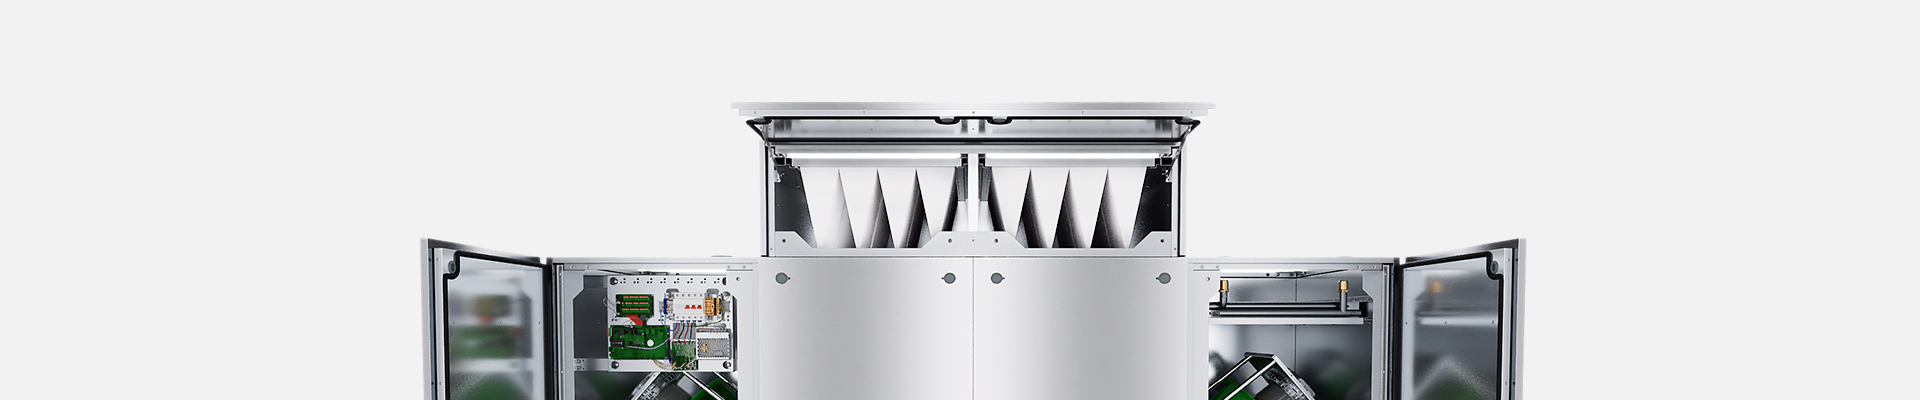 Compact air handling units with vertical duct connection. - slider